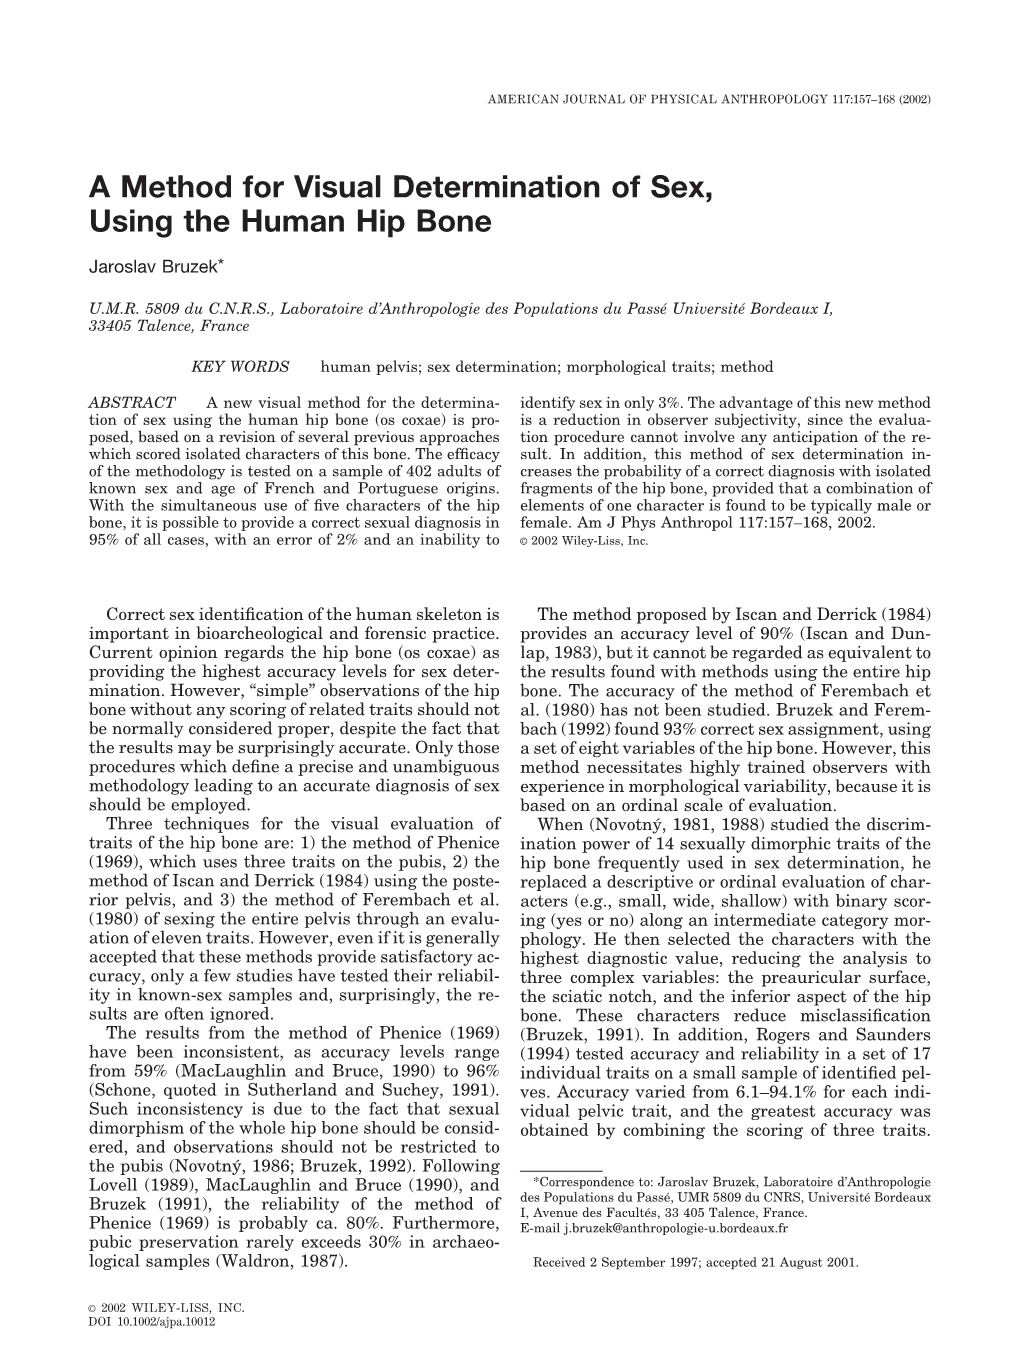 A Method for Visual Determination of Sex, Using the Human Hip Bone